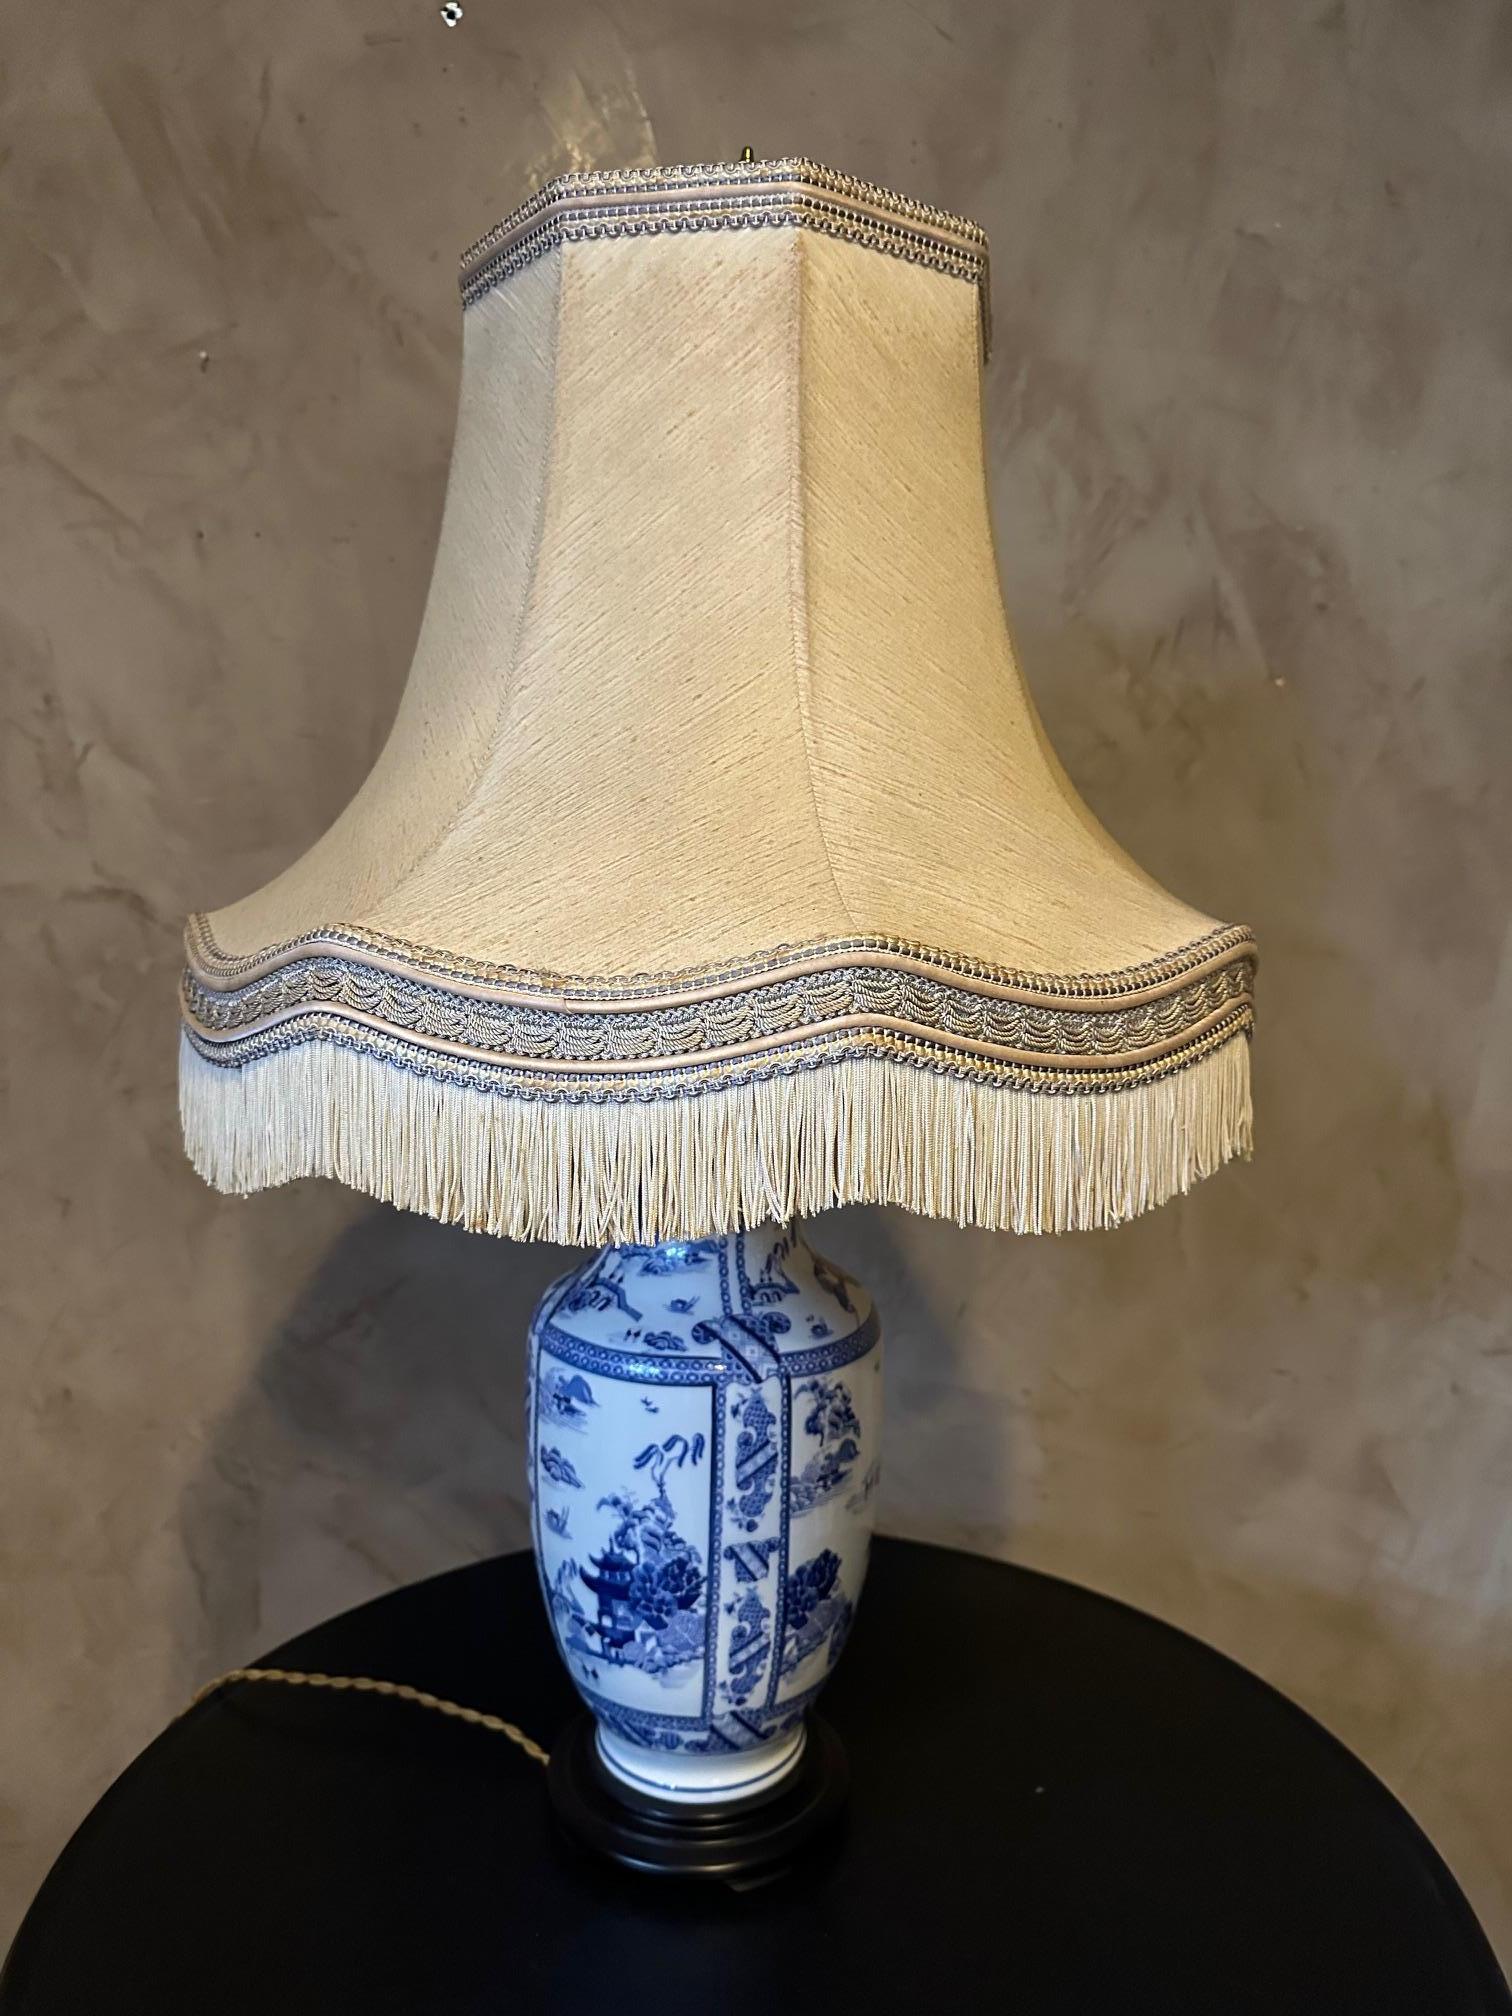 Large Chinese lamp in blue and white porcelain from the 1950s decorated with pagodas and characters.
Lampshade decorated with fringed trimmings in very good condition.
Wooden base. Brass tip. Very good overall condition. Original in its large size.